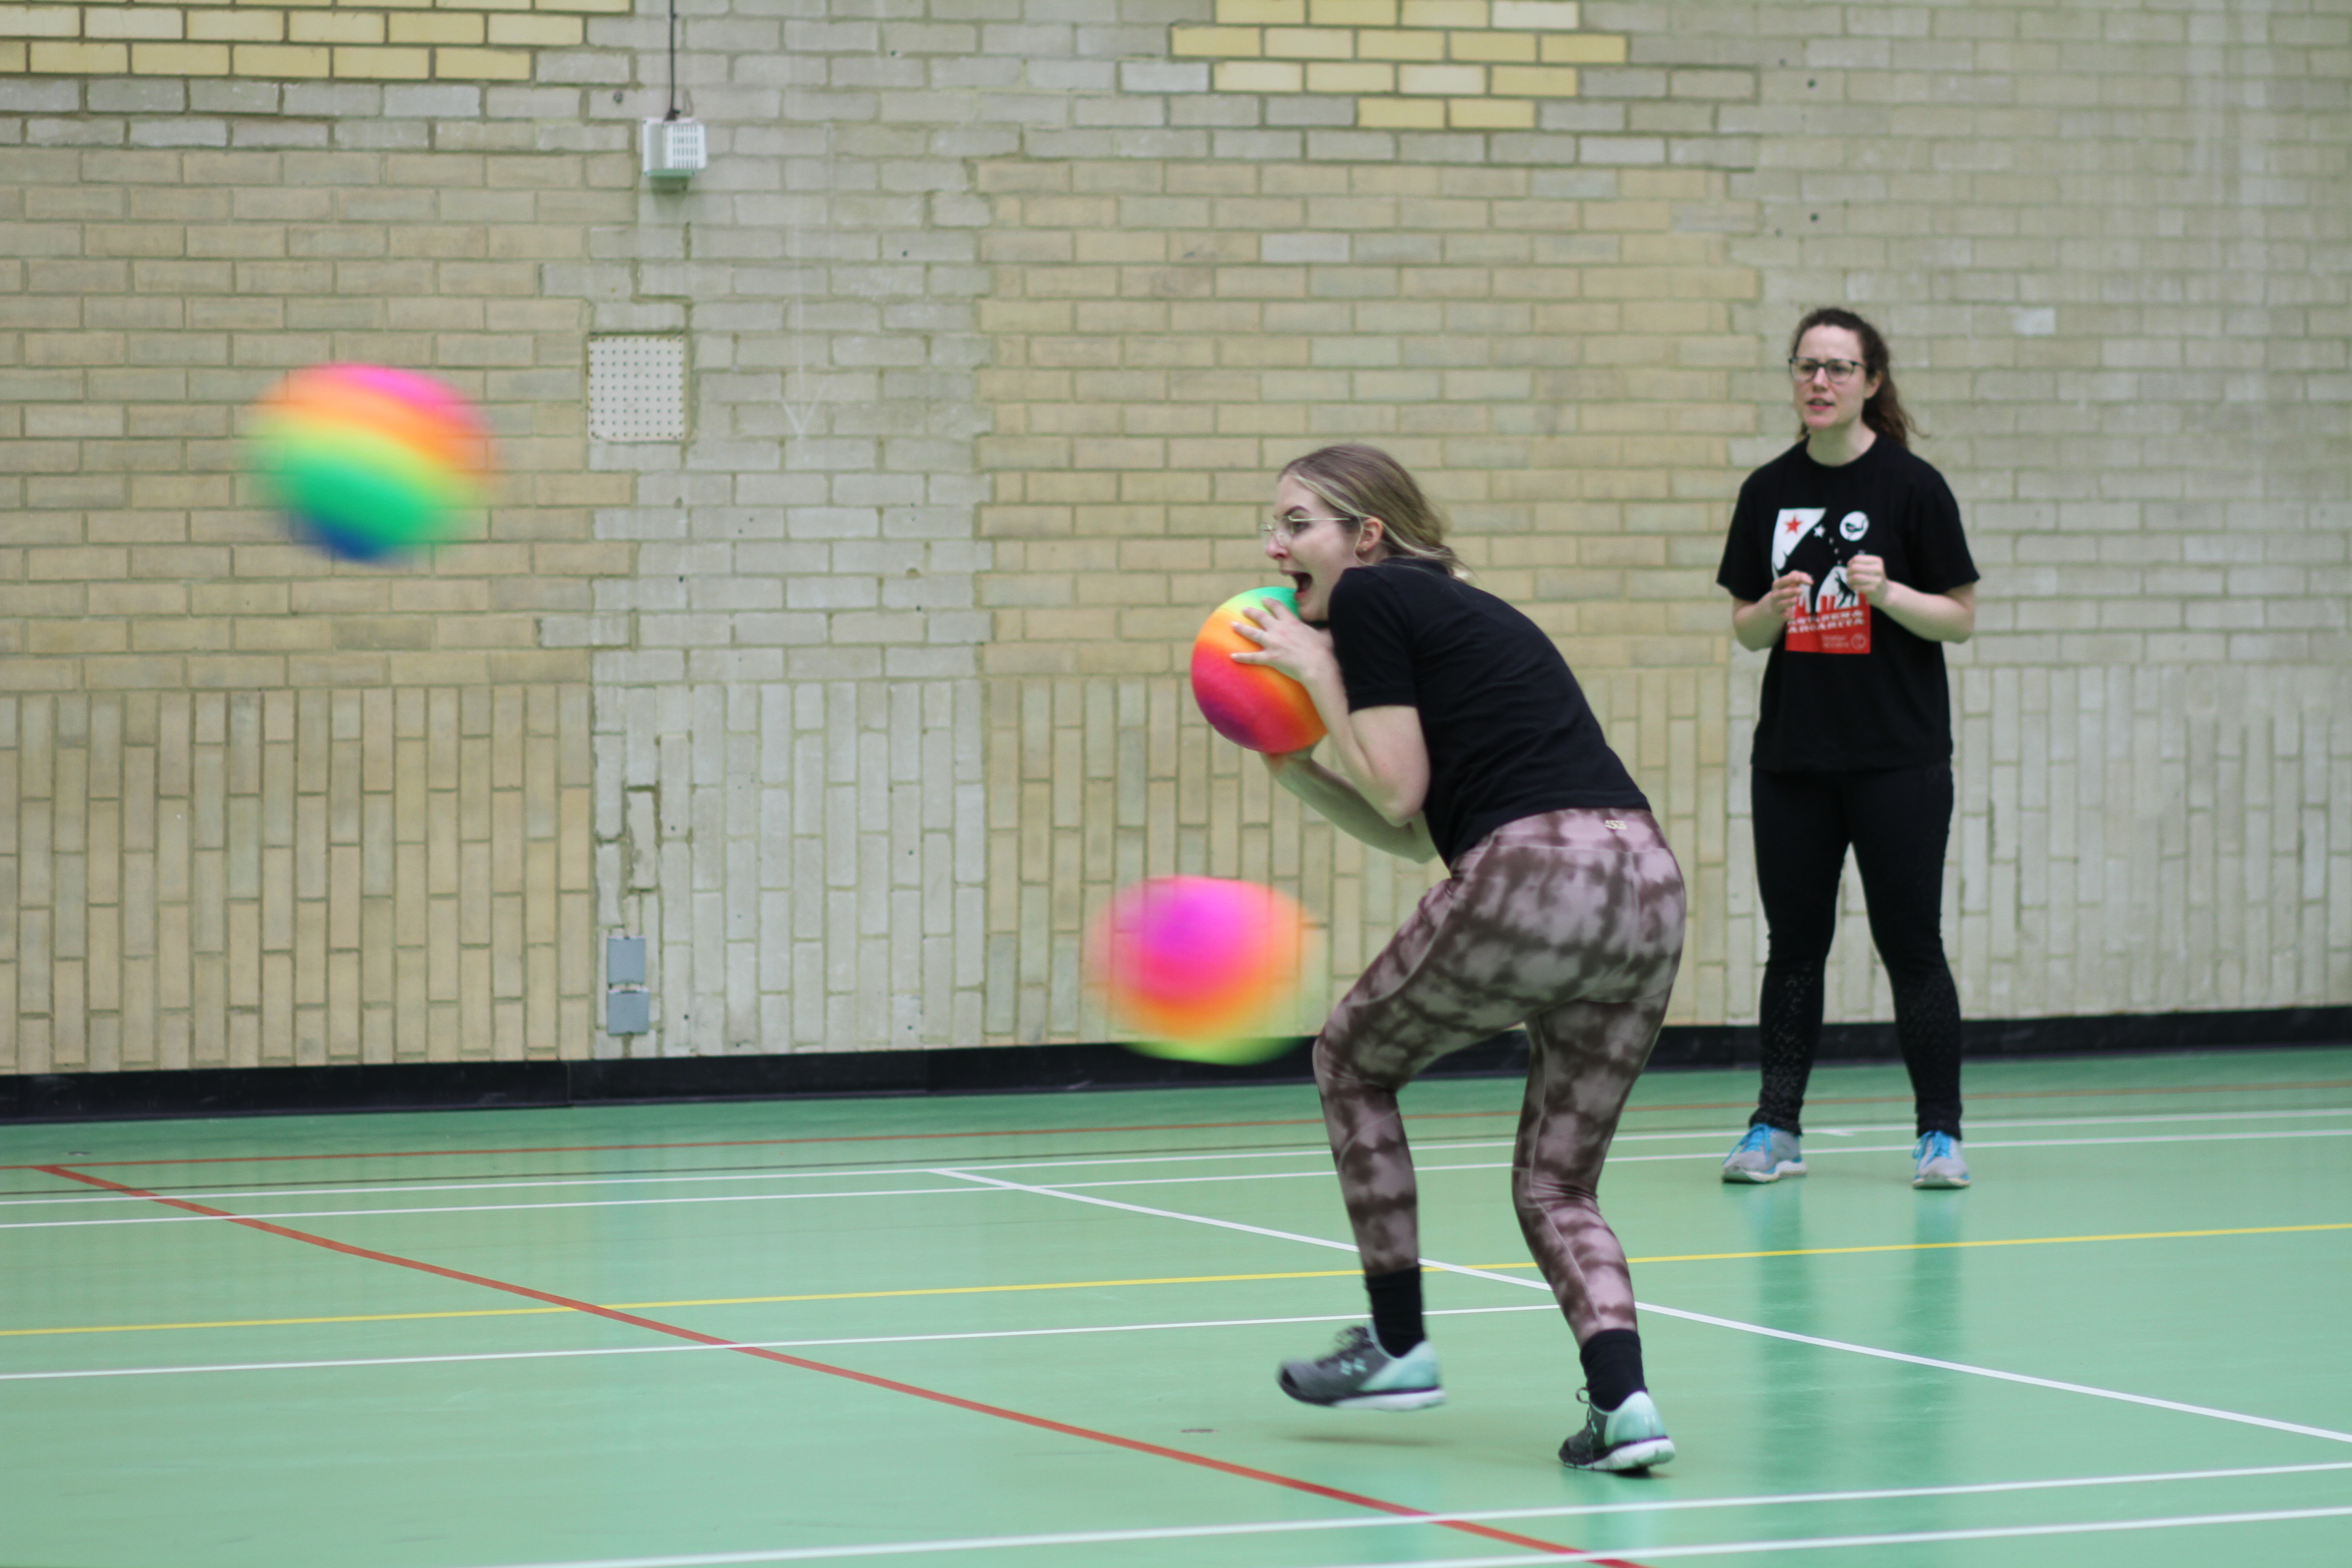 Player ducking and trying to get away from three dodgeballs which have been thrown at her.